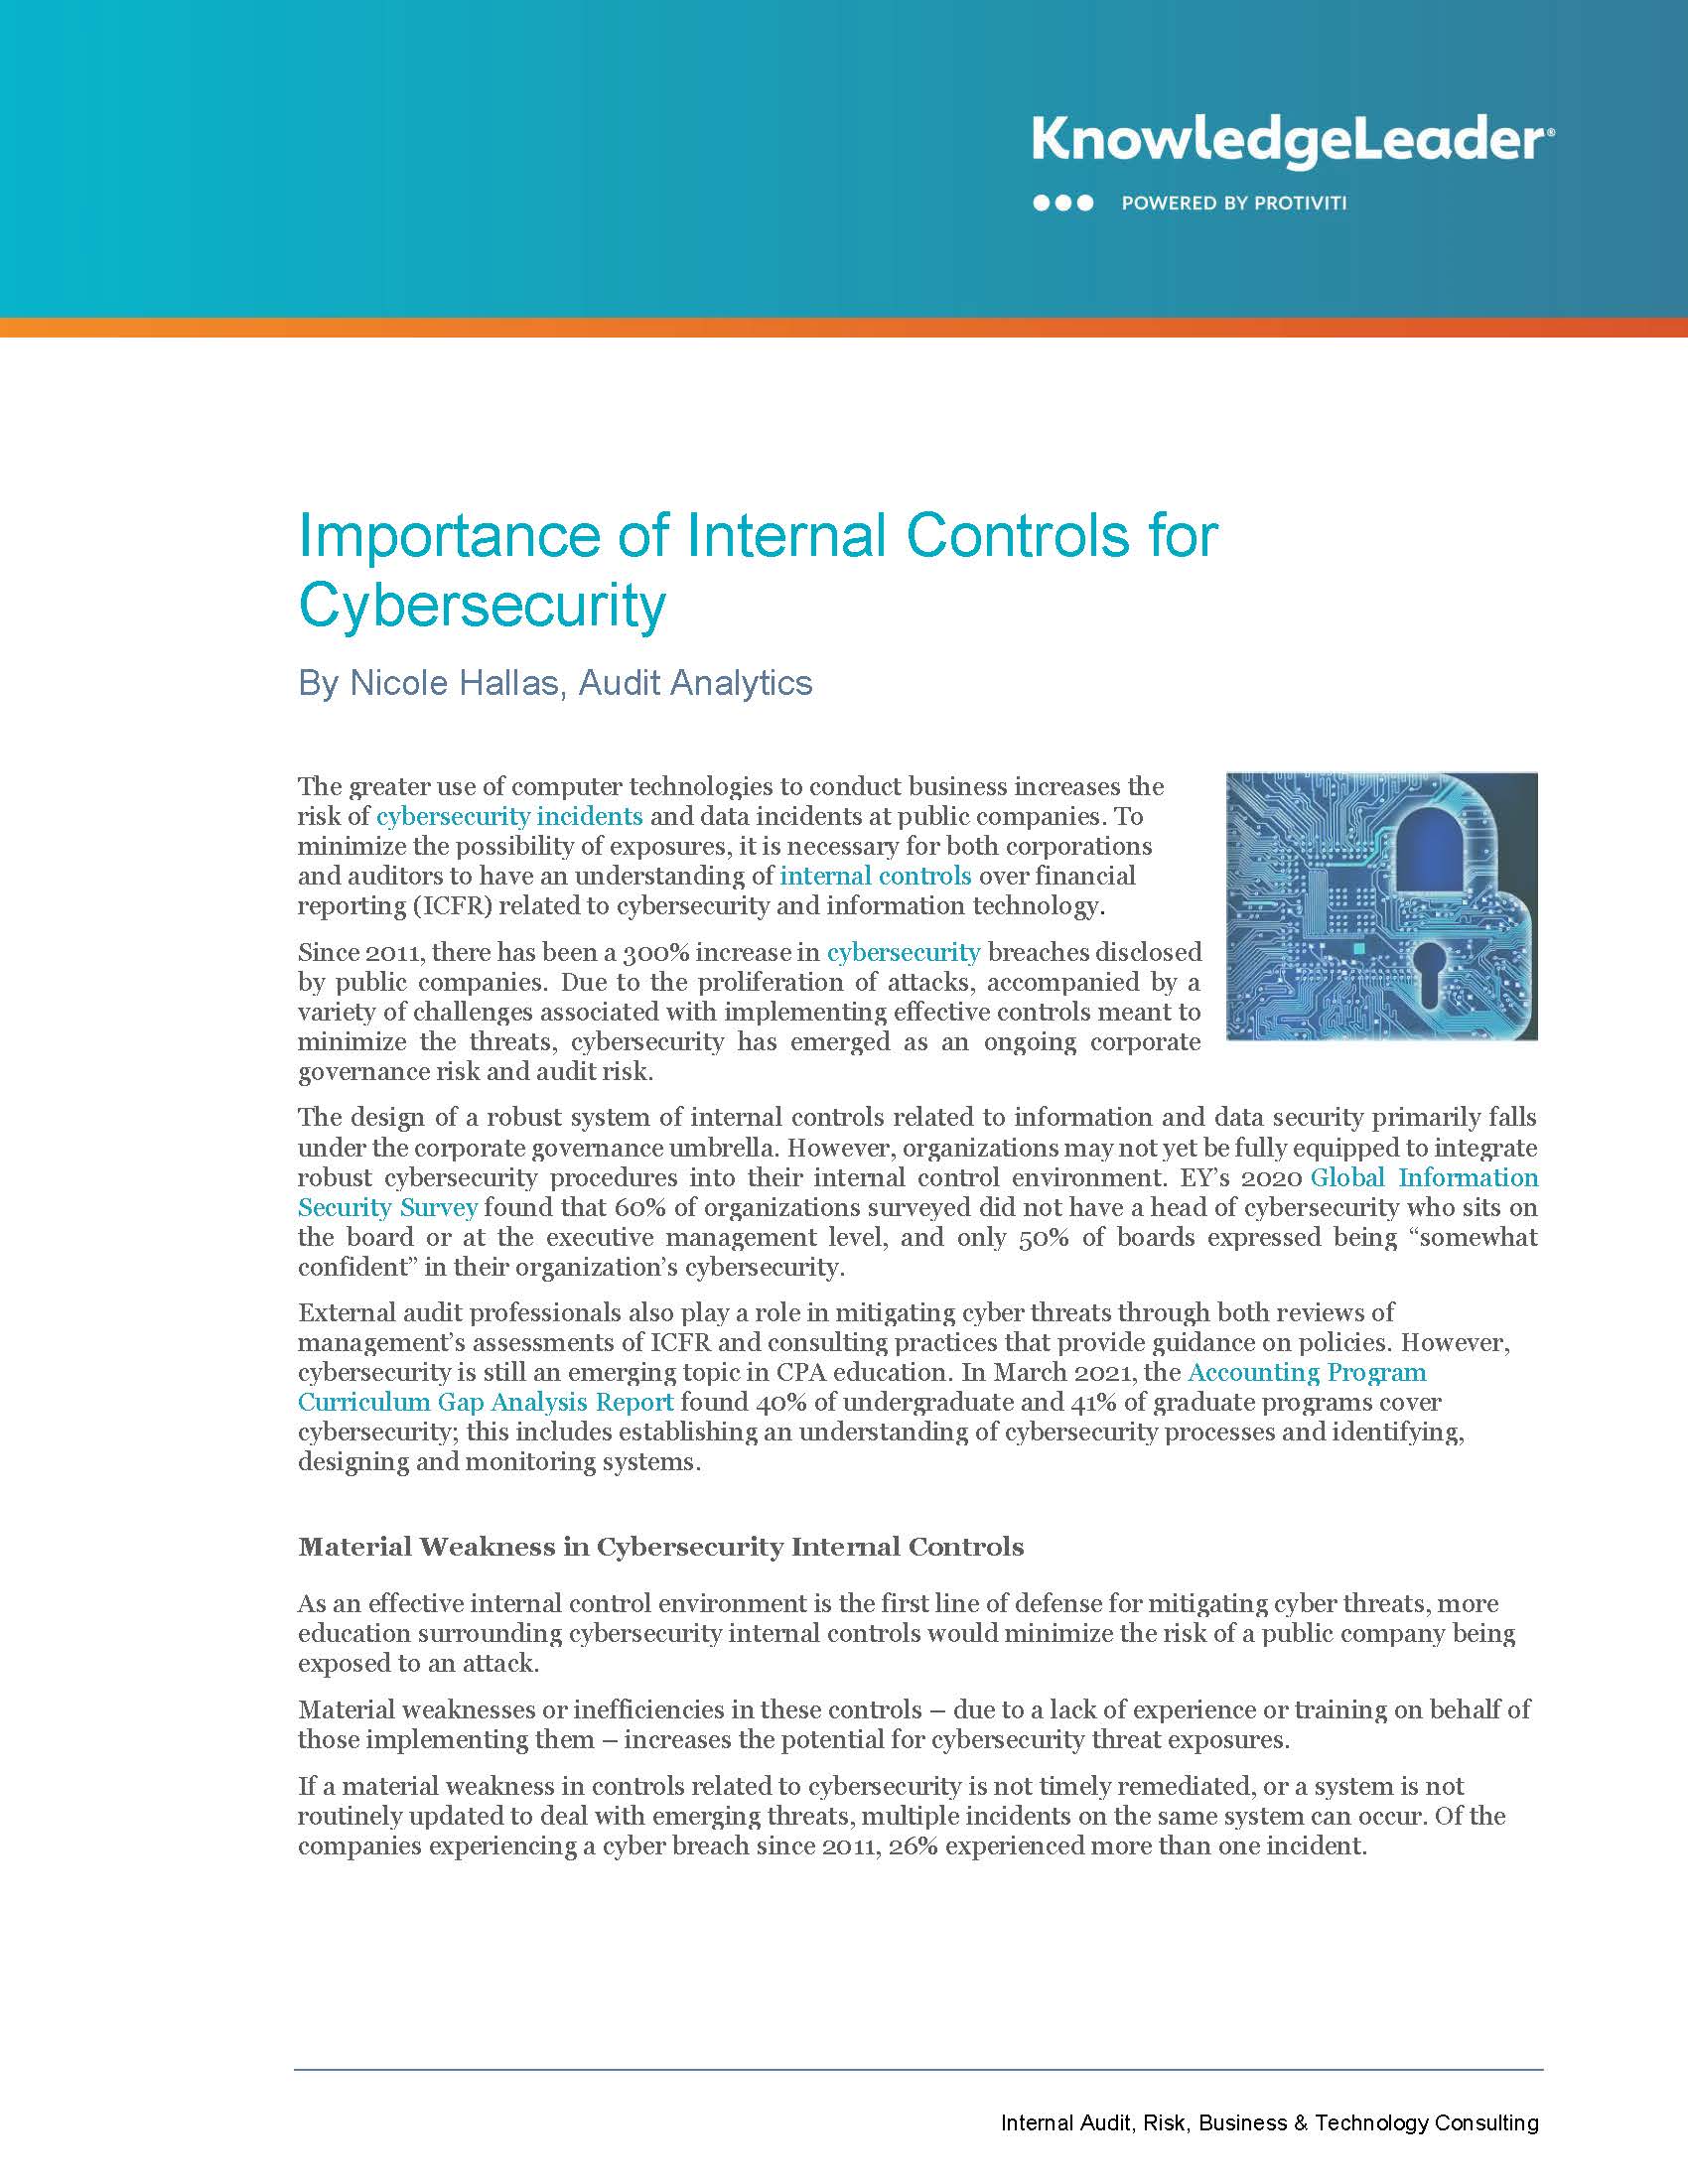 Screenshot of the first page of Importance of Internal Controls for Cybersecurity